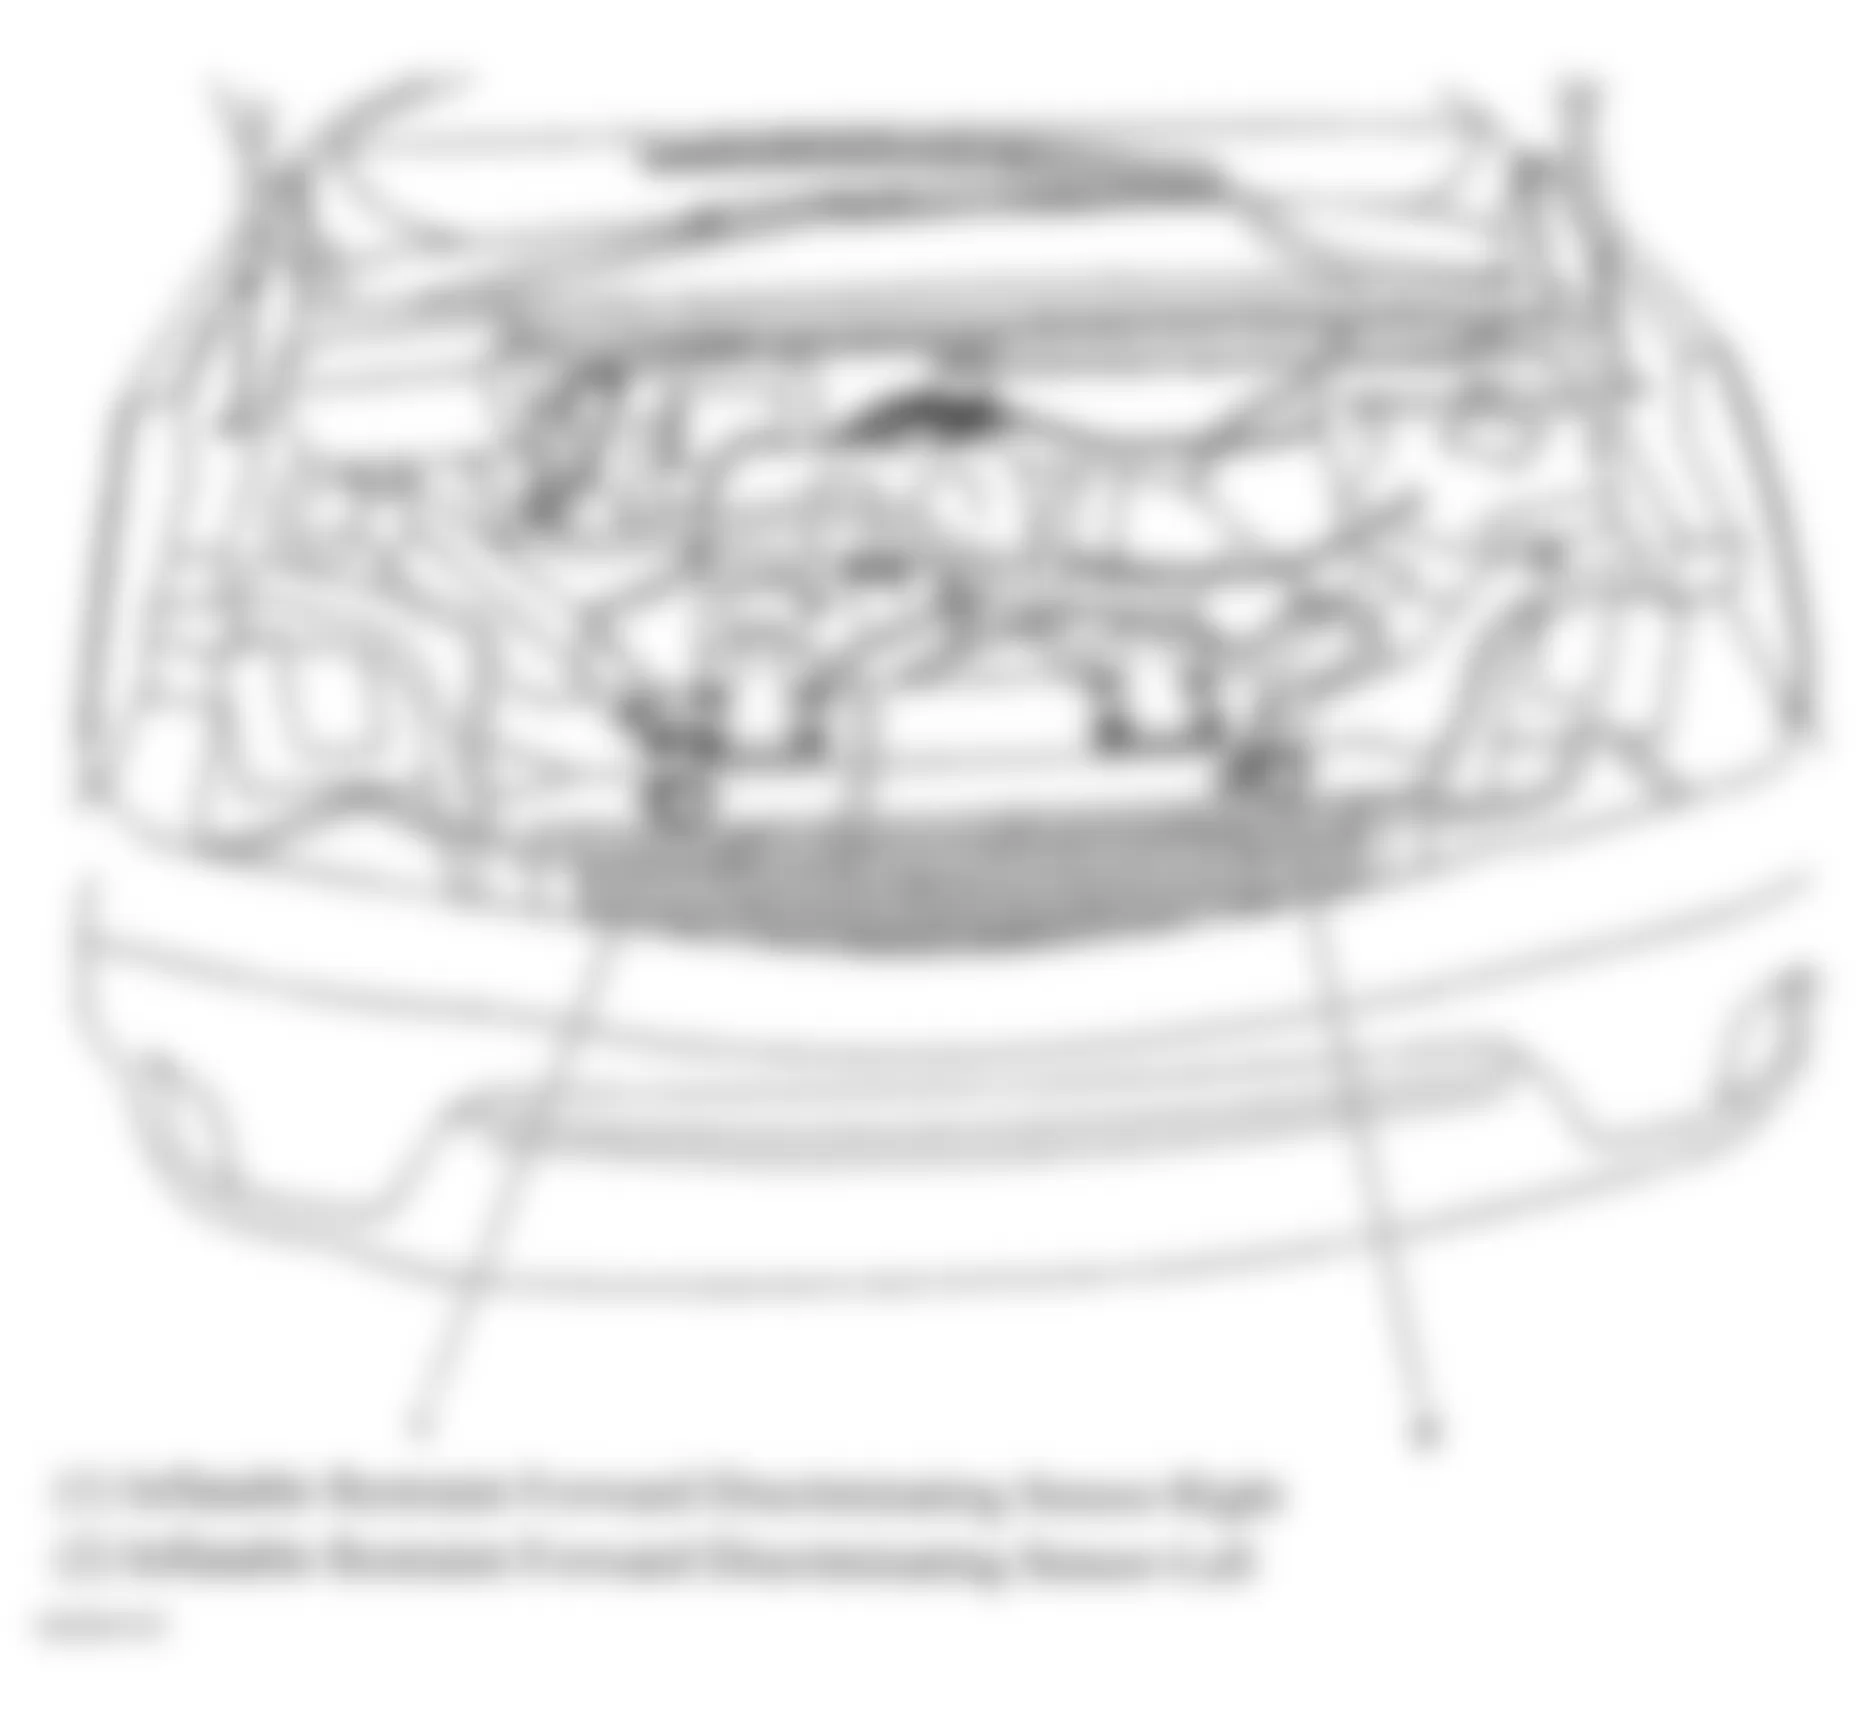 Buick Rendezvous Ultra 2004 - Component Locations -  Front Of Engine Compartment